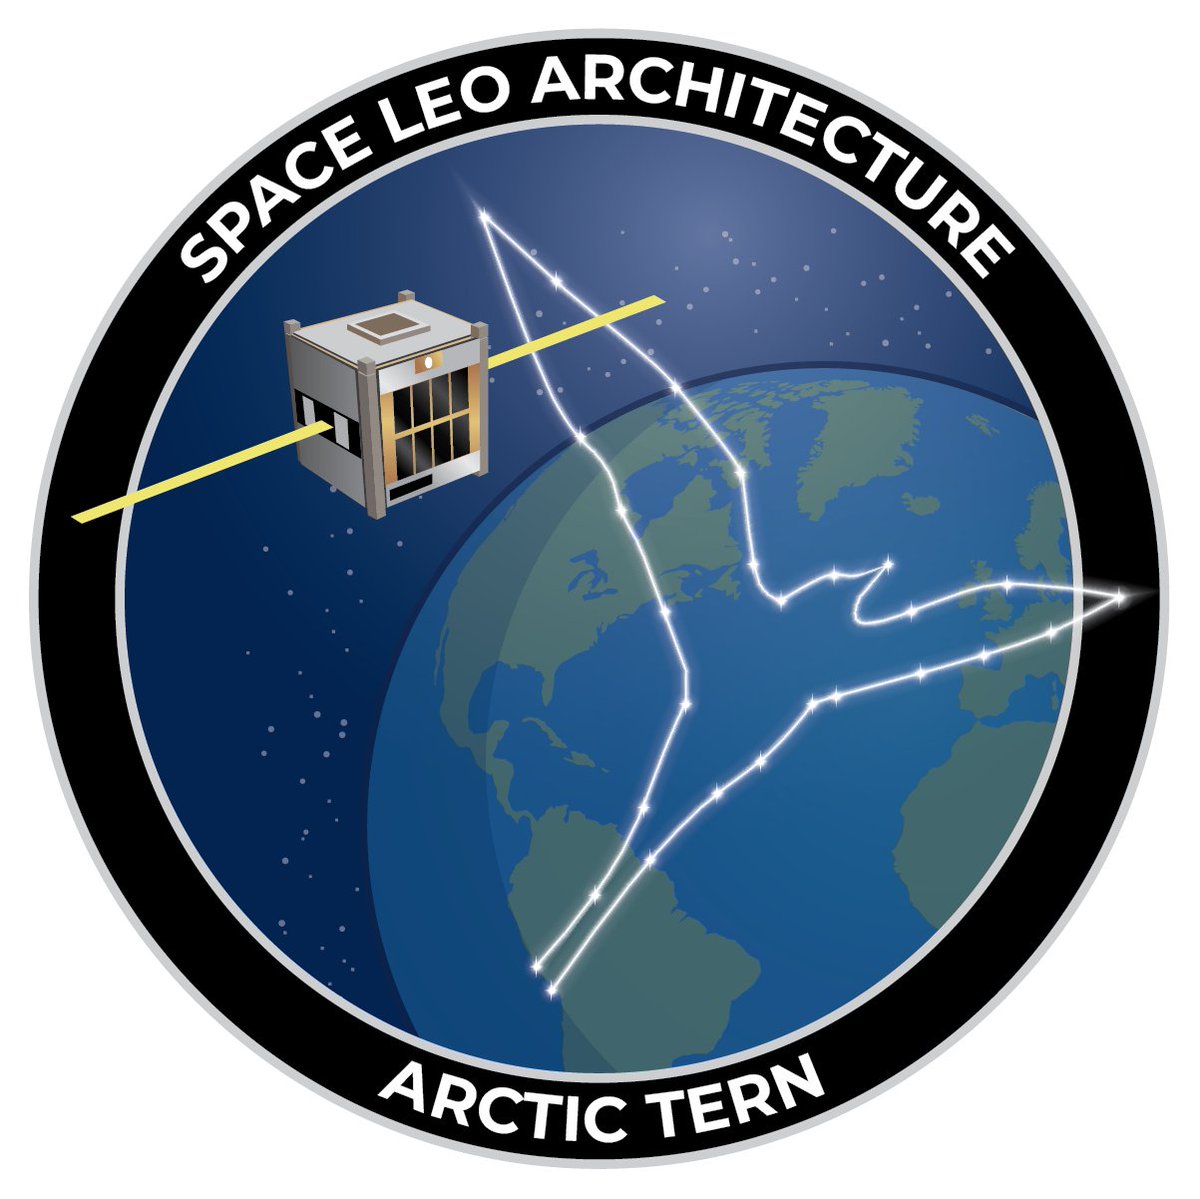 We’re conducting research on data relay technology using low earth orbit (LEO) satellites for Canada’s defence and security. Read more about how you can work with us on space LEO architecture: canada.ca/en/defence-res… #DefenceScience